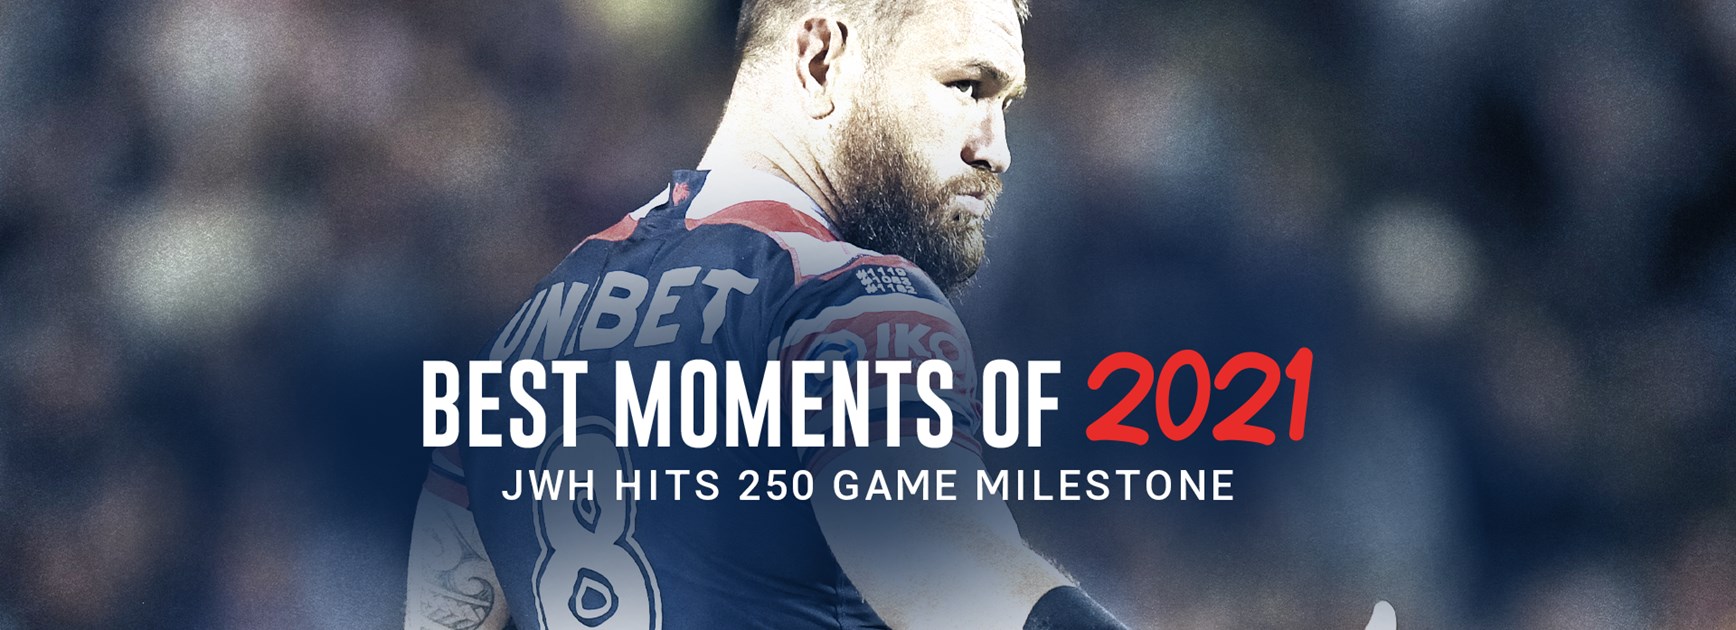 Best Moments of 2021: JWH Hits 250 Game Milestone